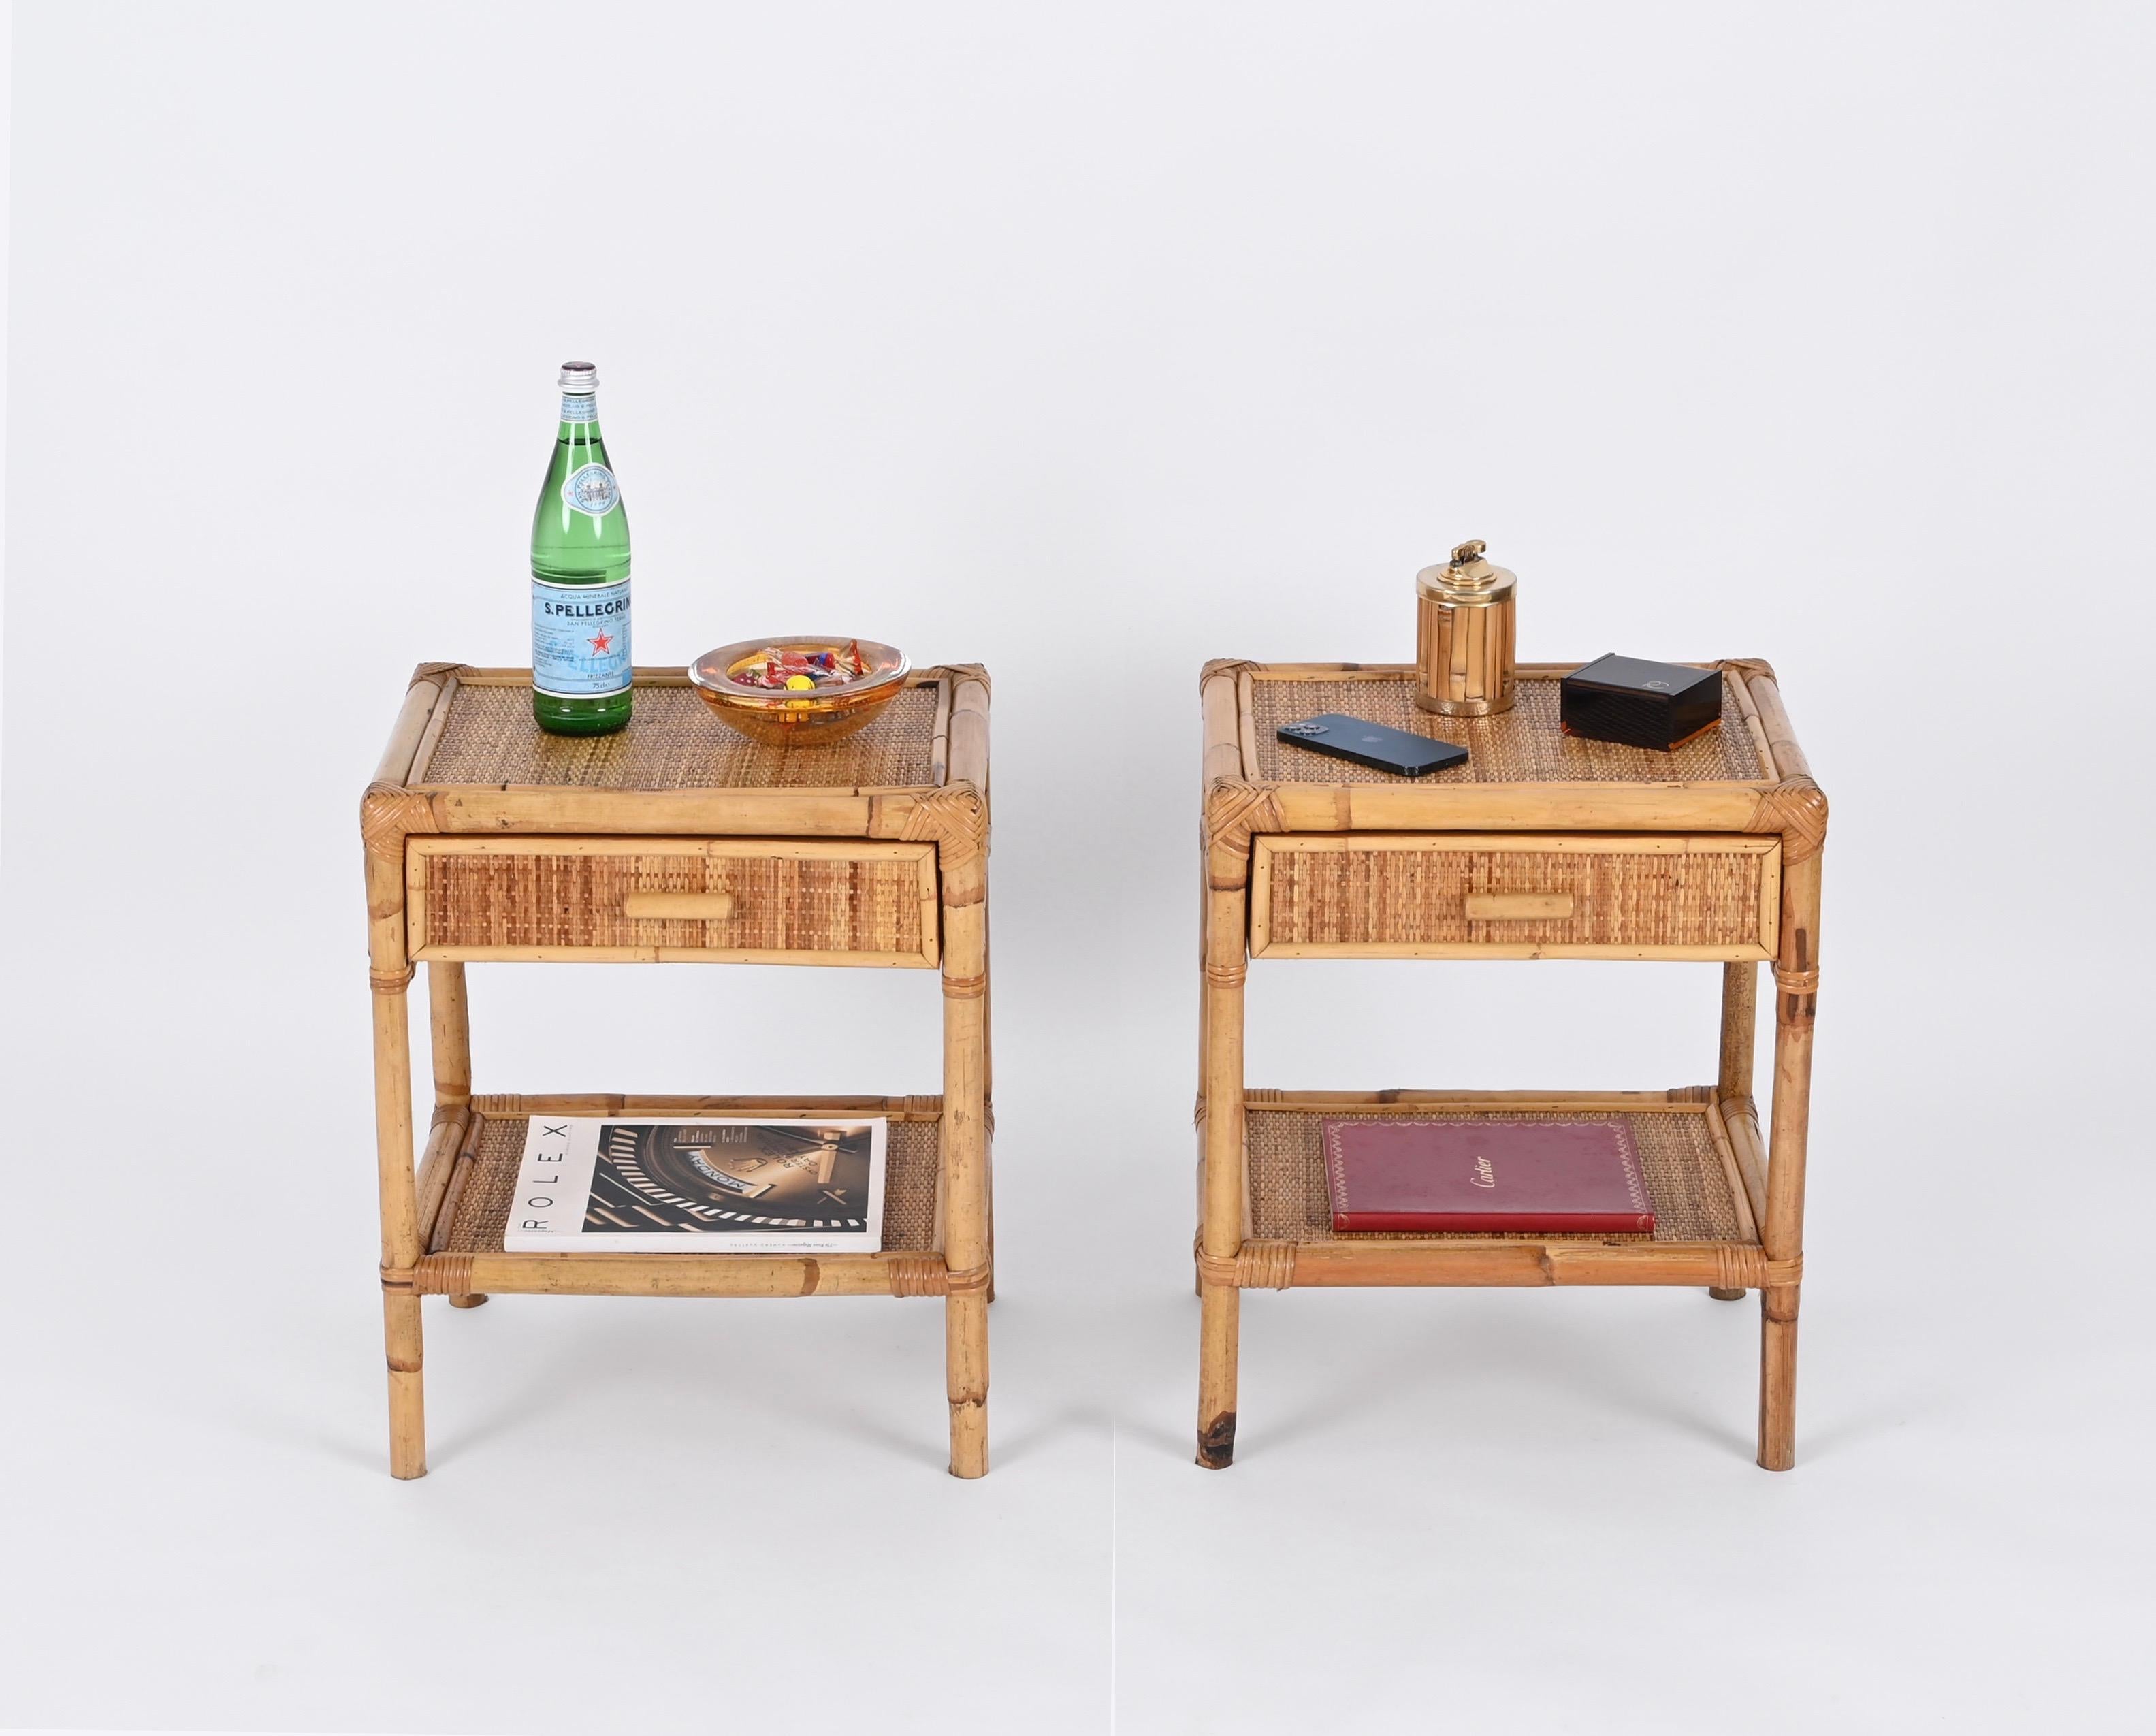 Gorgeous pair of Mid-Century nightstands in bamboo and woven rattan. These lovely bedside tables were designed in Italy during the 1970s.

These nightstands are fully made in bamboo canes and enriched all around by stunning woven rattan.  The